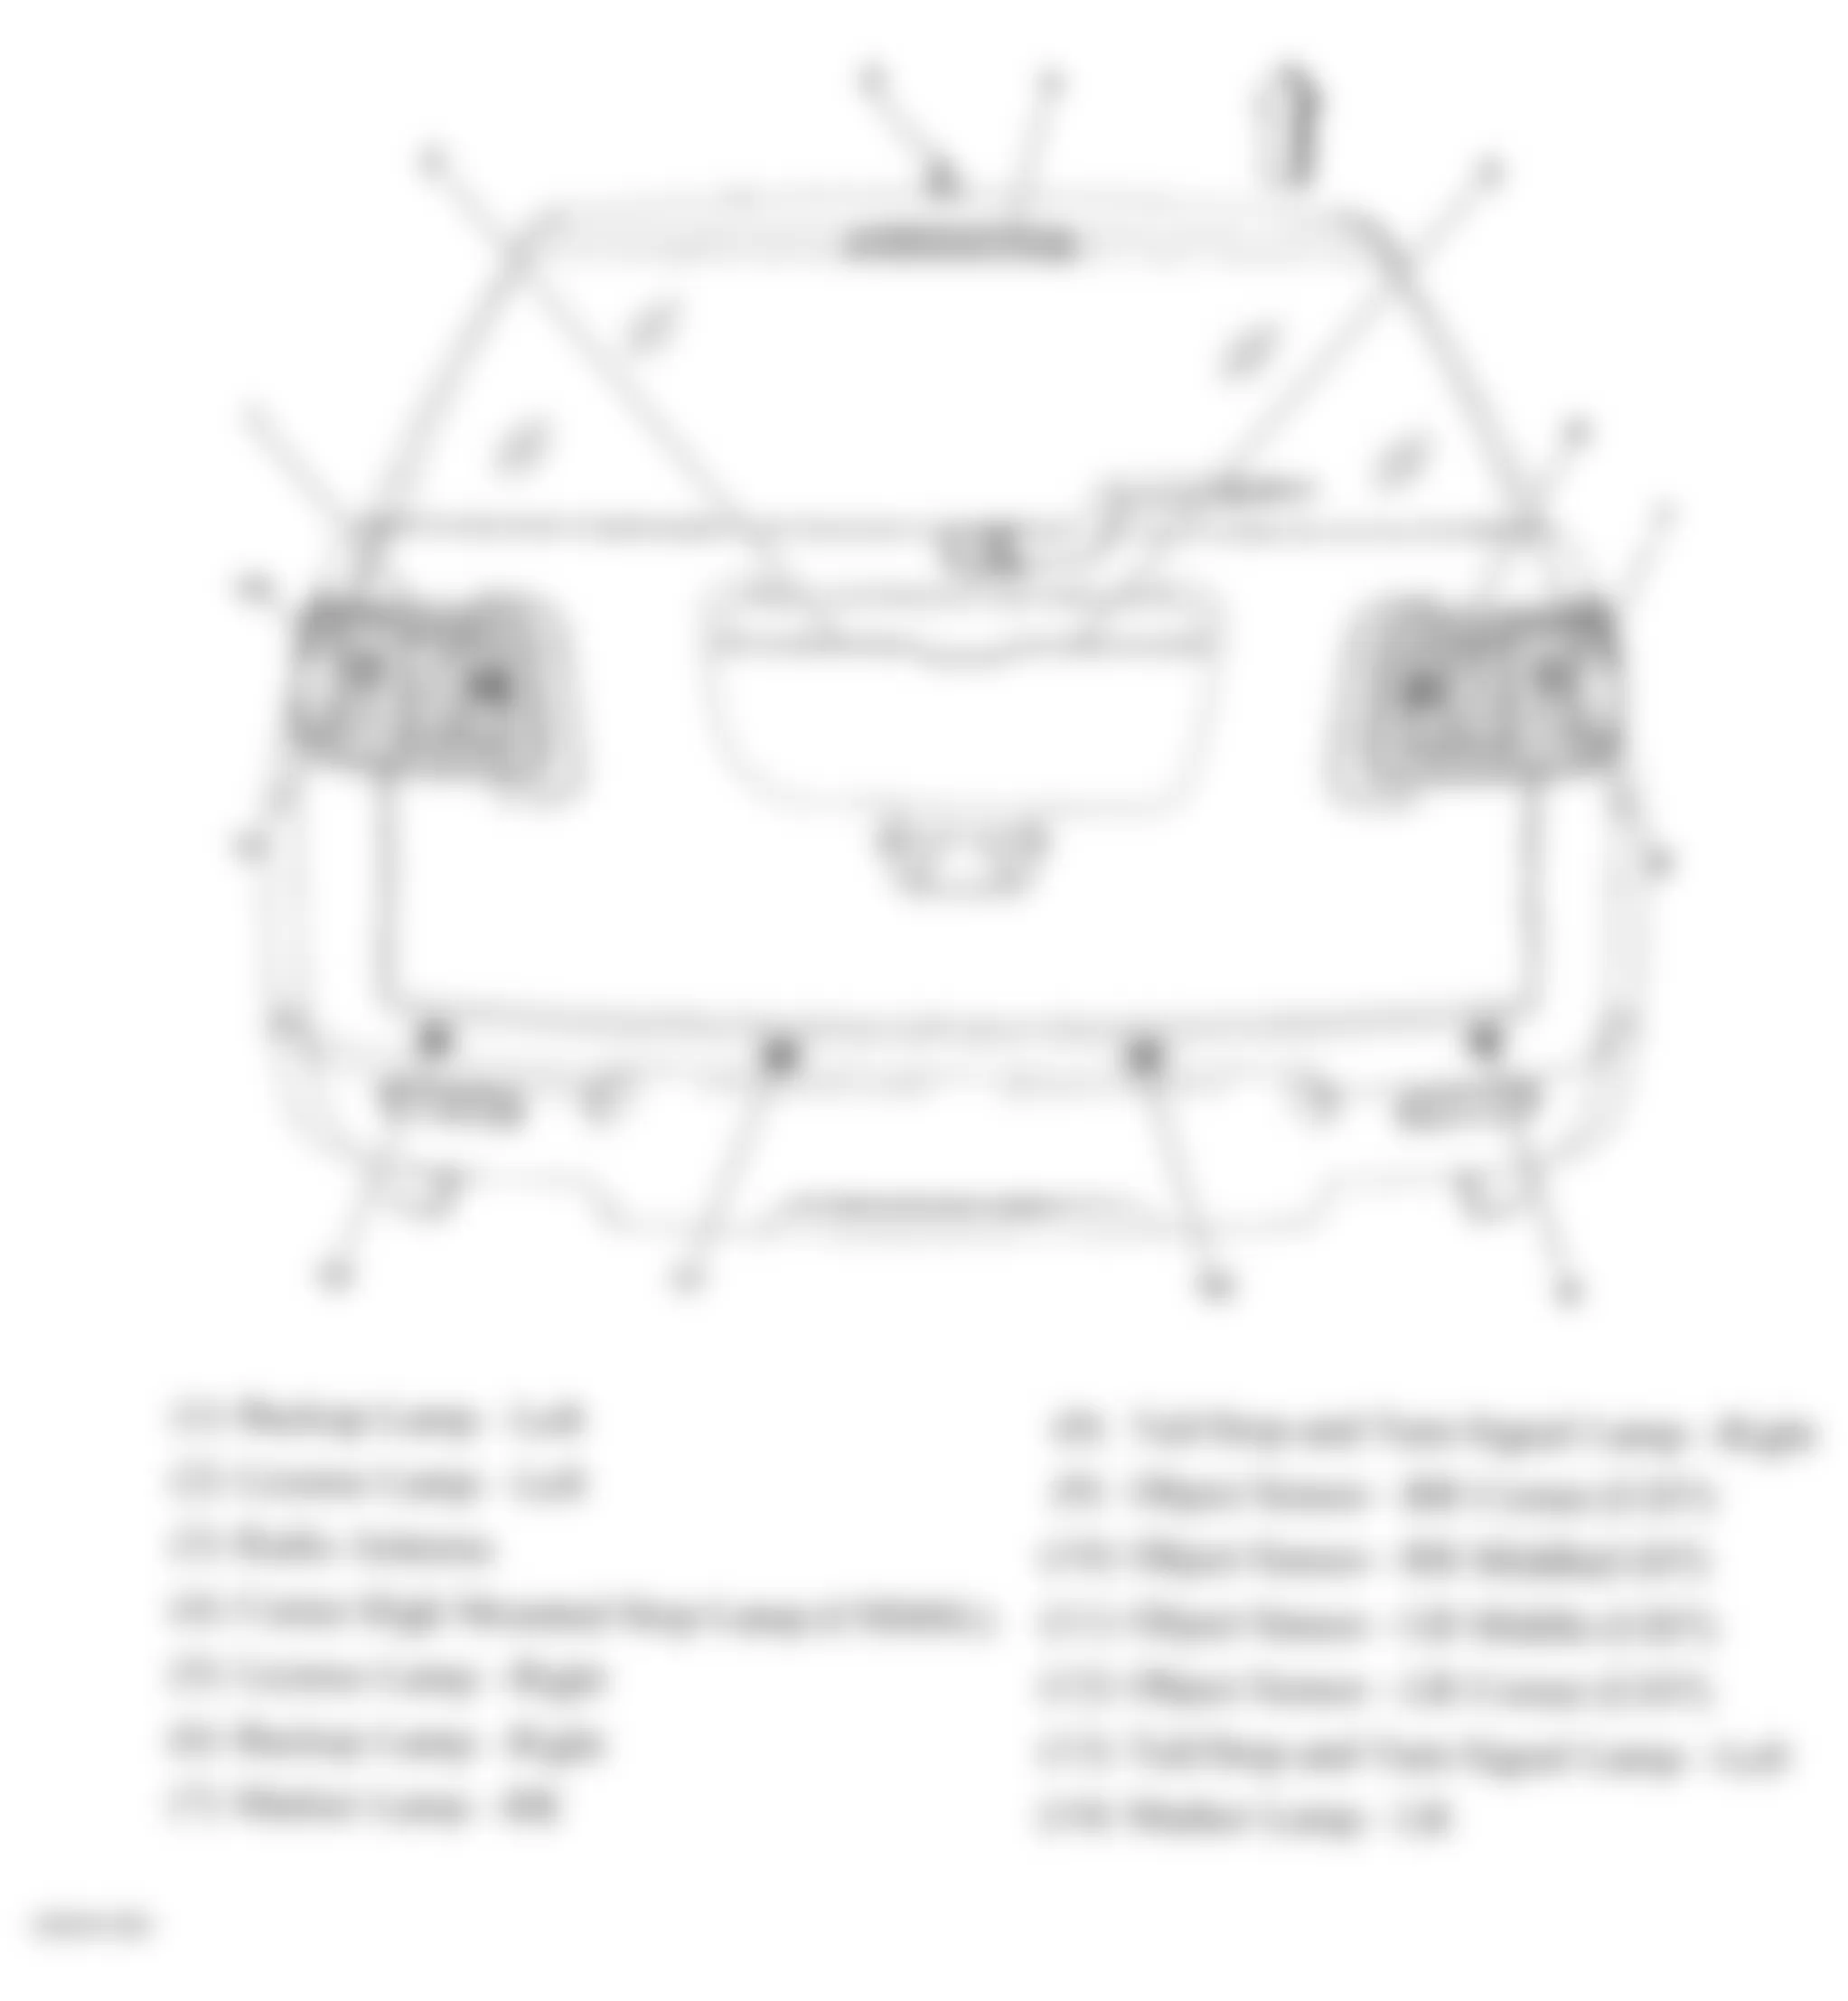 GMC Acadia SLT 2007 - Component Locations -  Rear Of Vehicle (Outlook)